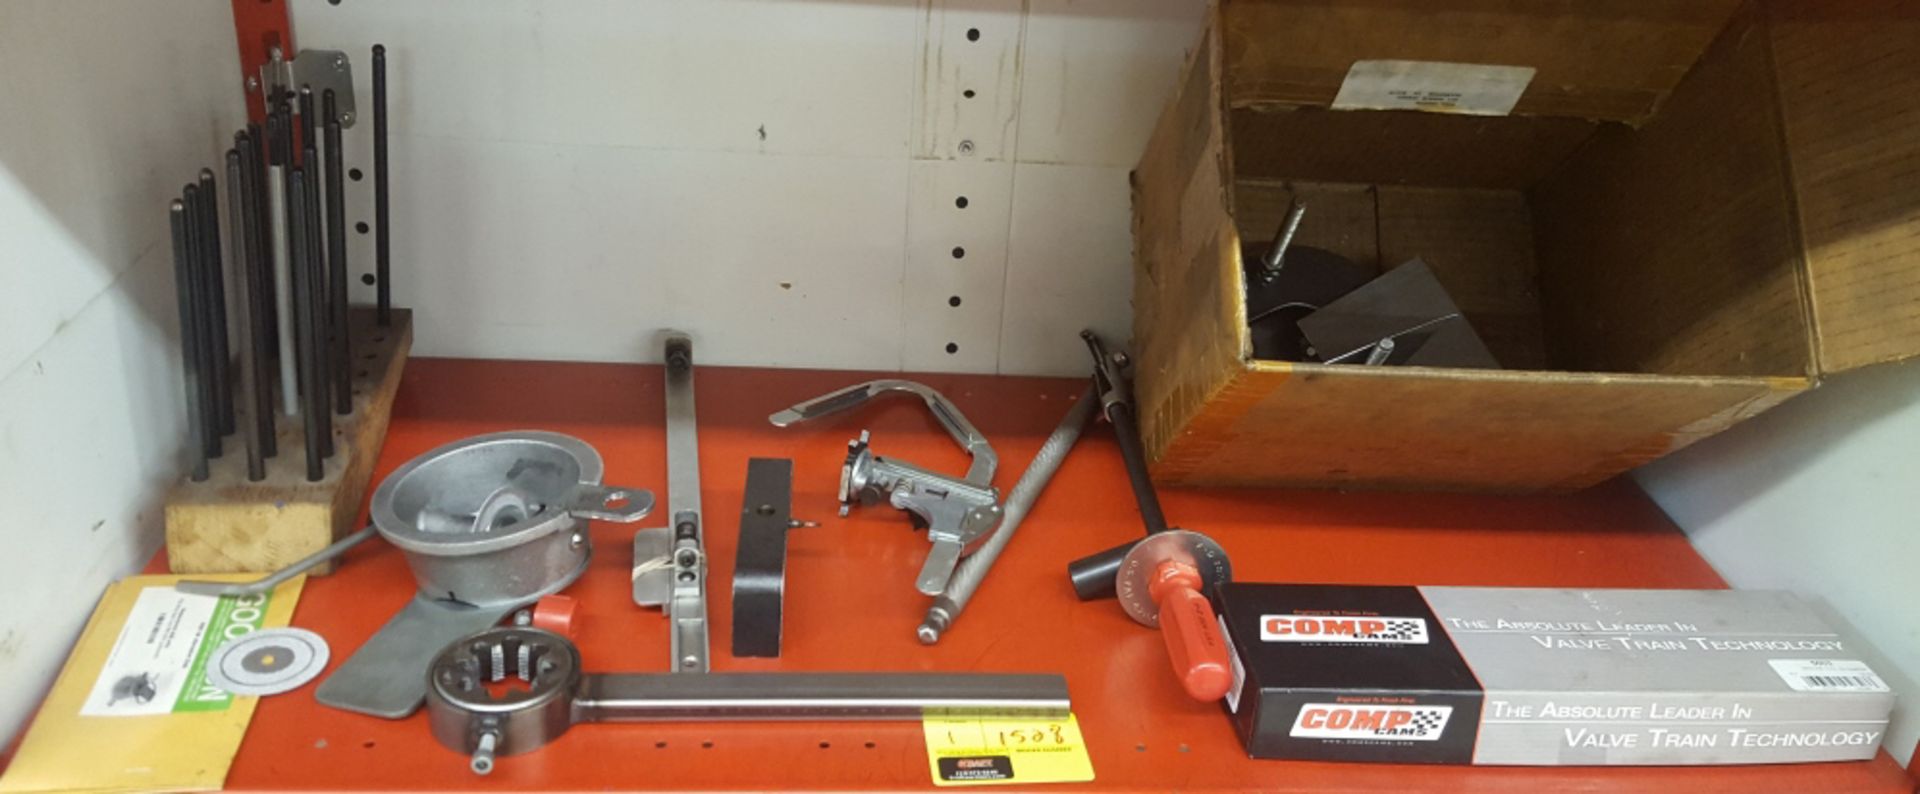 Shelf w/Grooving Tool and Speciality Tools